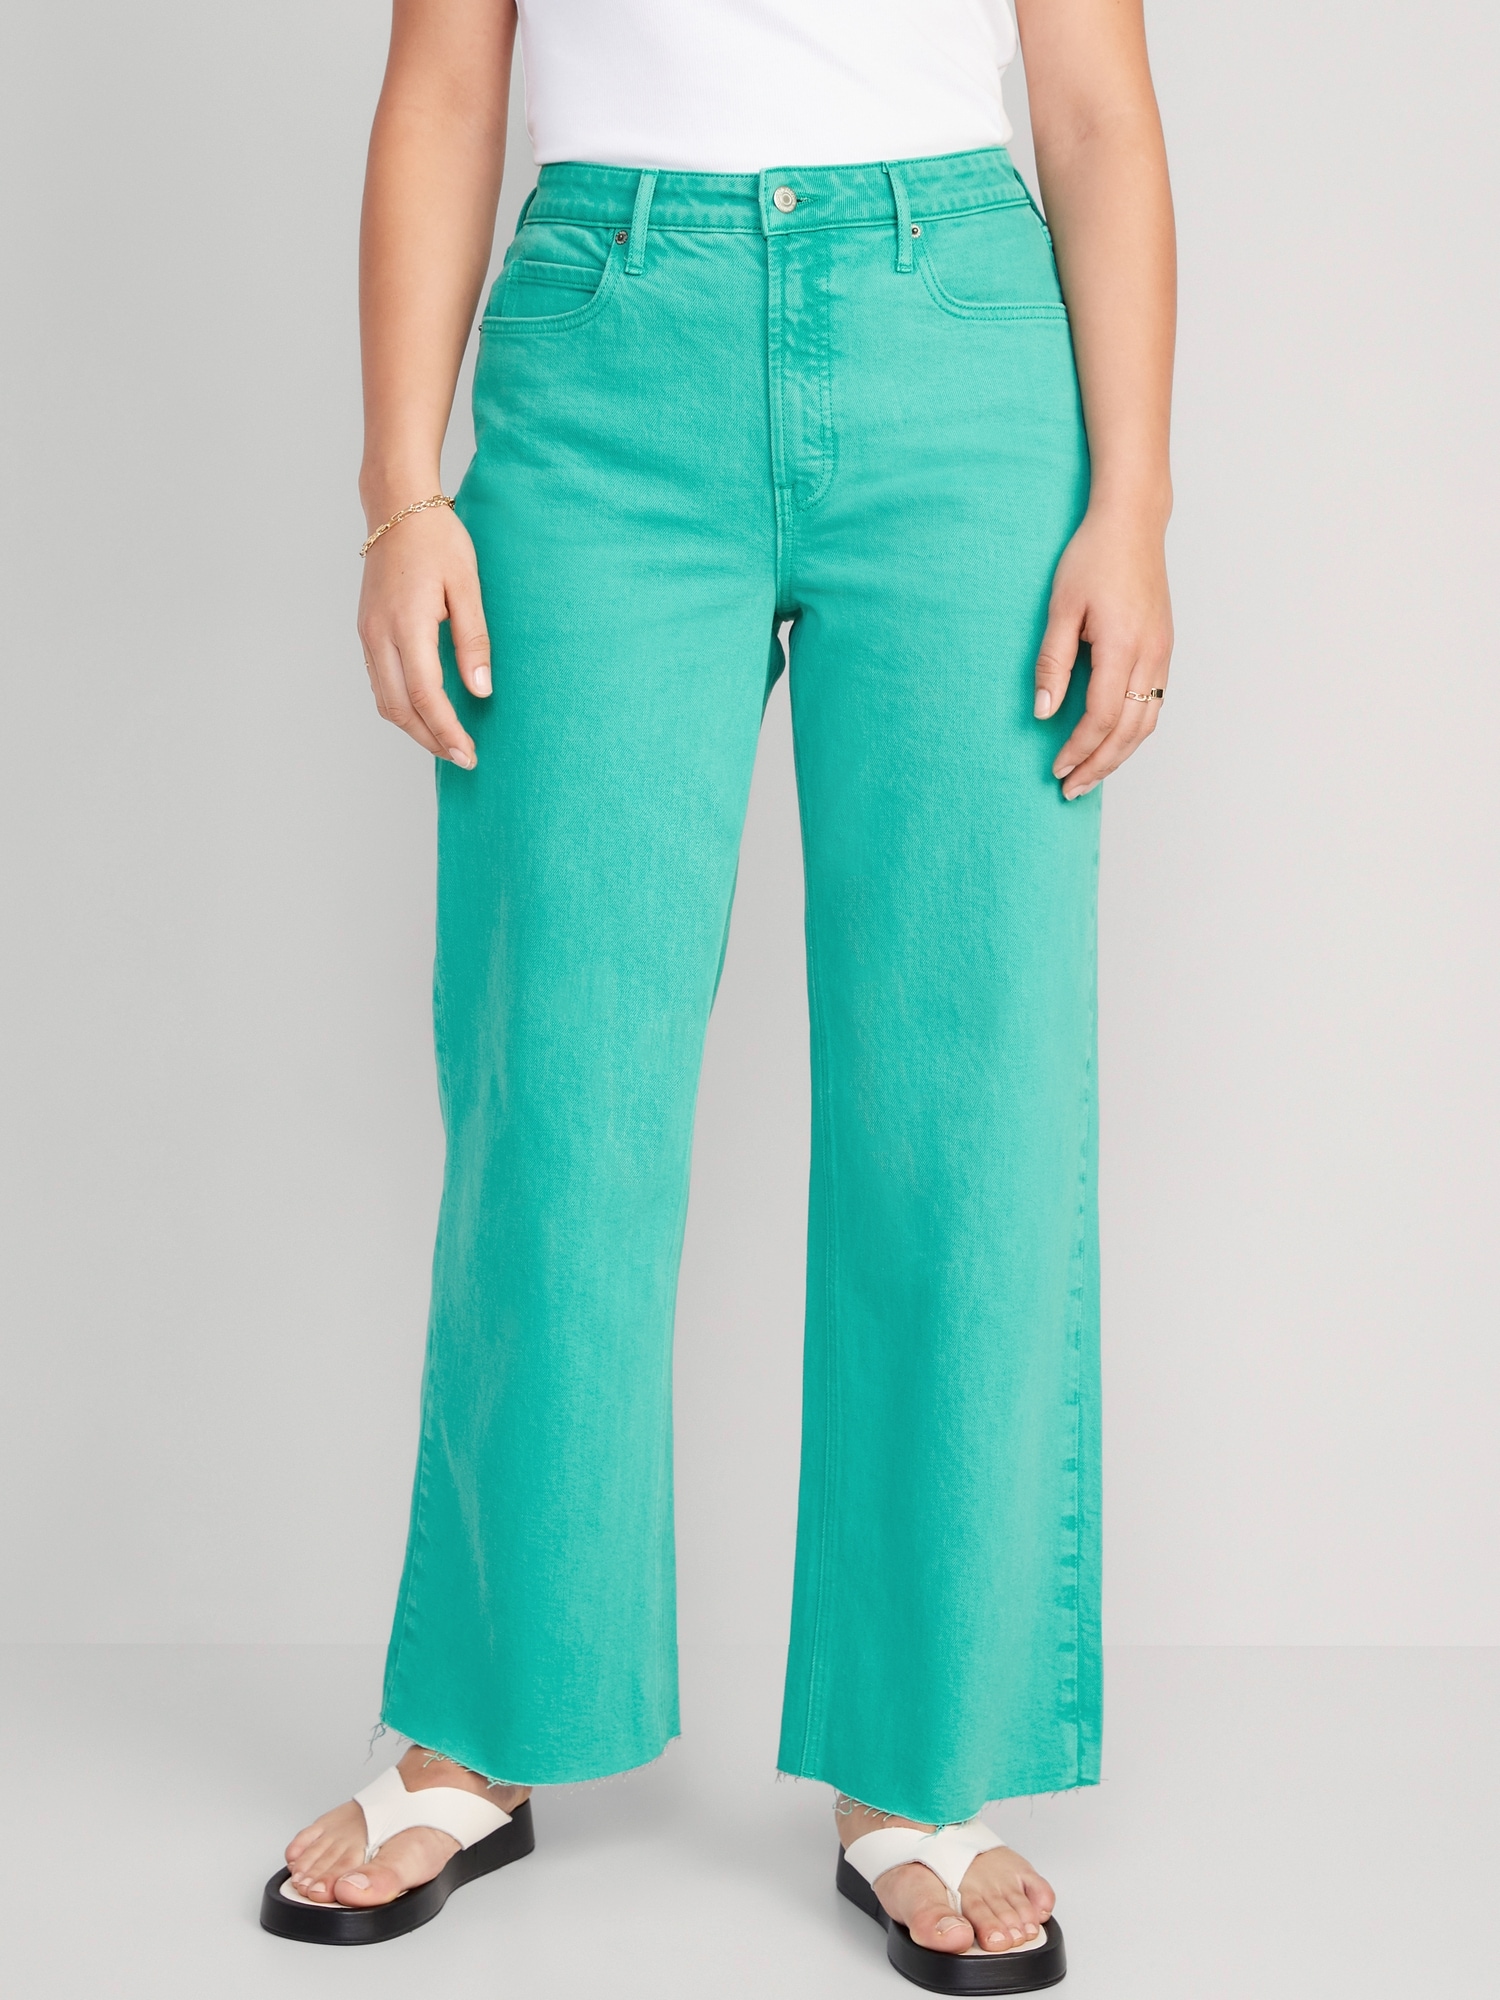 Extra High-Waisted Pop-Color Wide Leg Cut-Off Jeans for Women | Old Navy